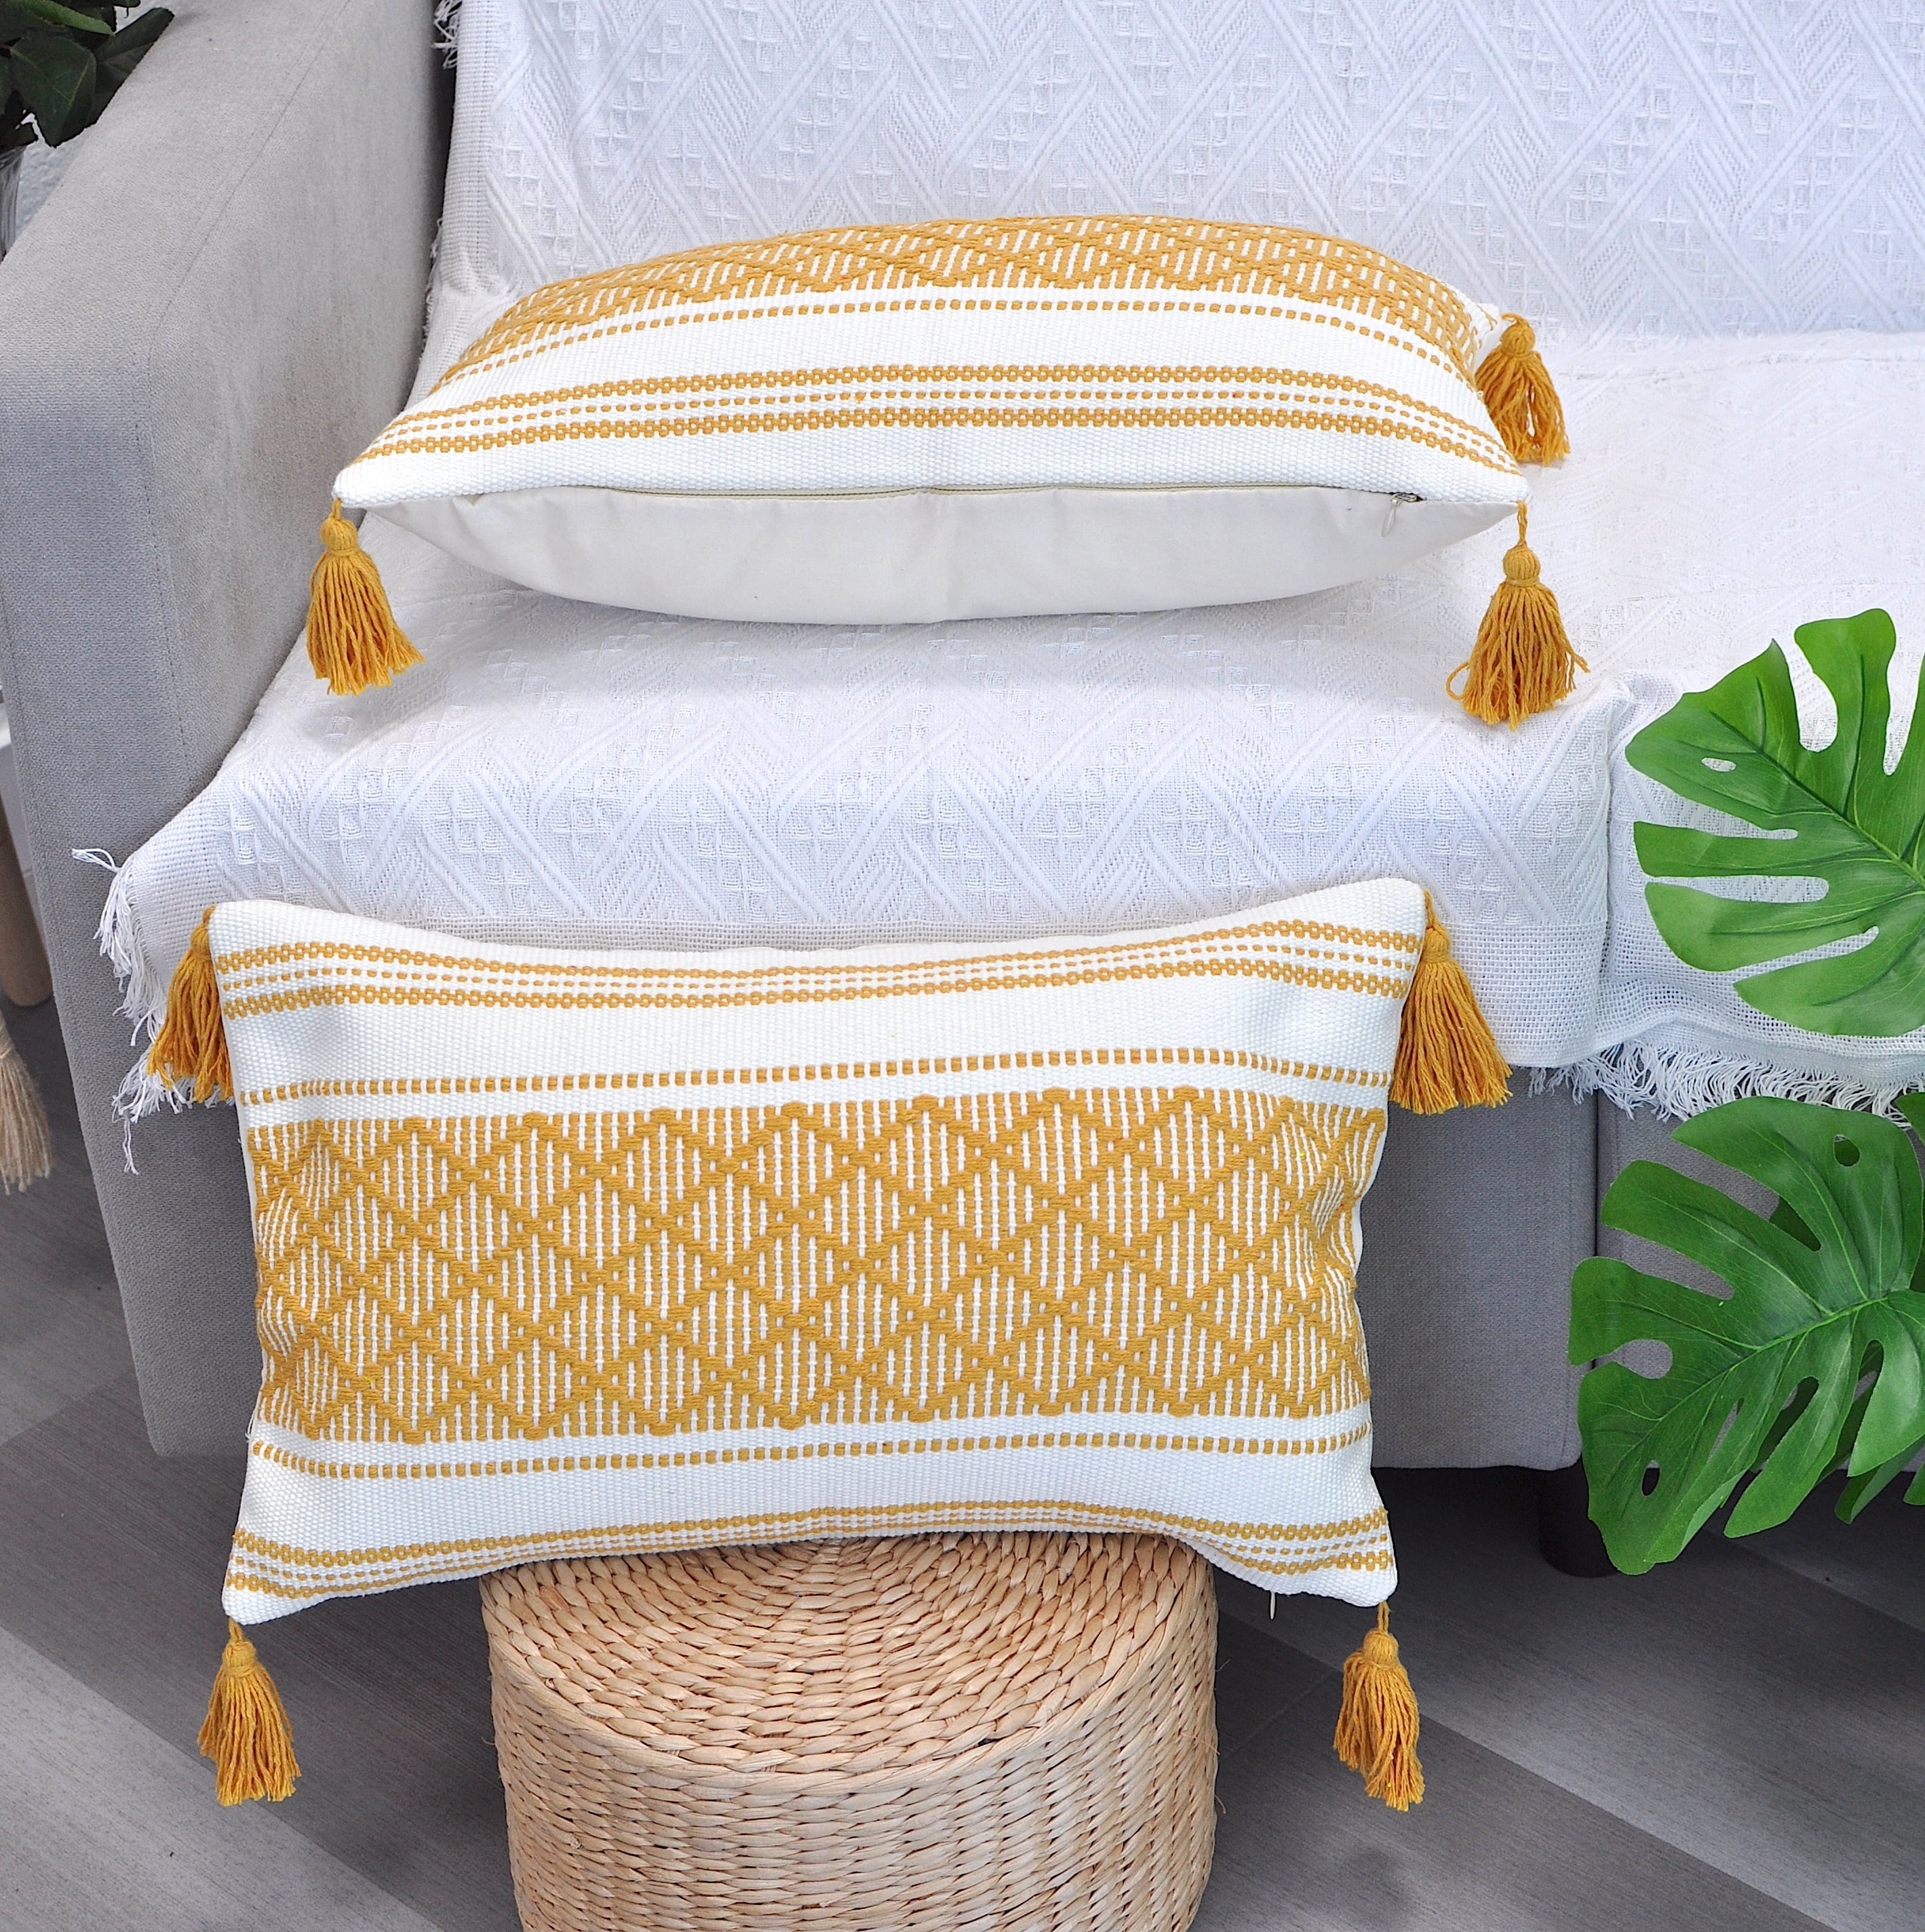 Macramé Decorative Boho Covers, Set of 2 Comfy Throw Decor Cases, Sturdy Handmade for Lumbar Support, Great for Nursery, Office Chair, Accent for